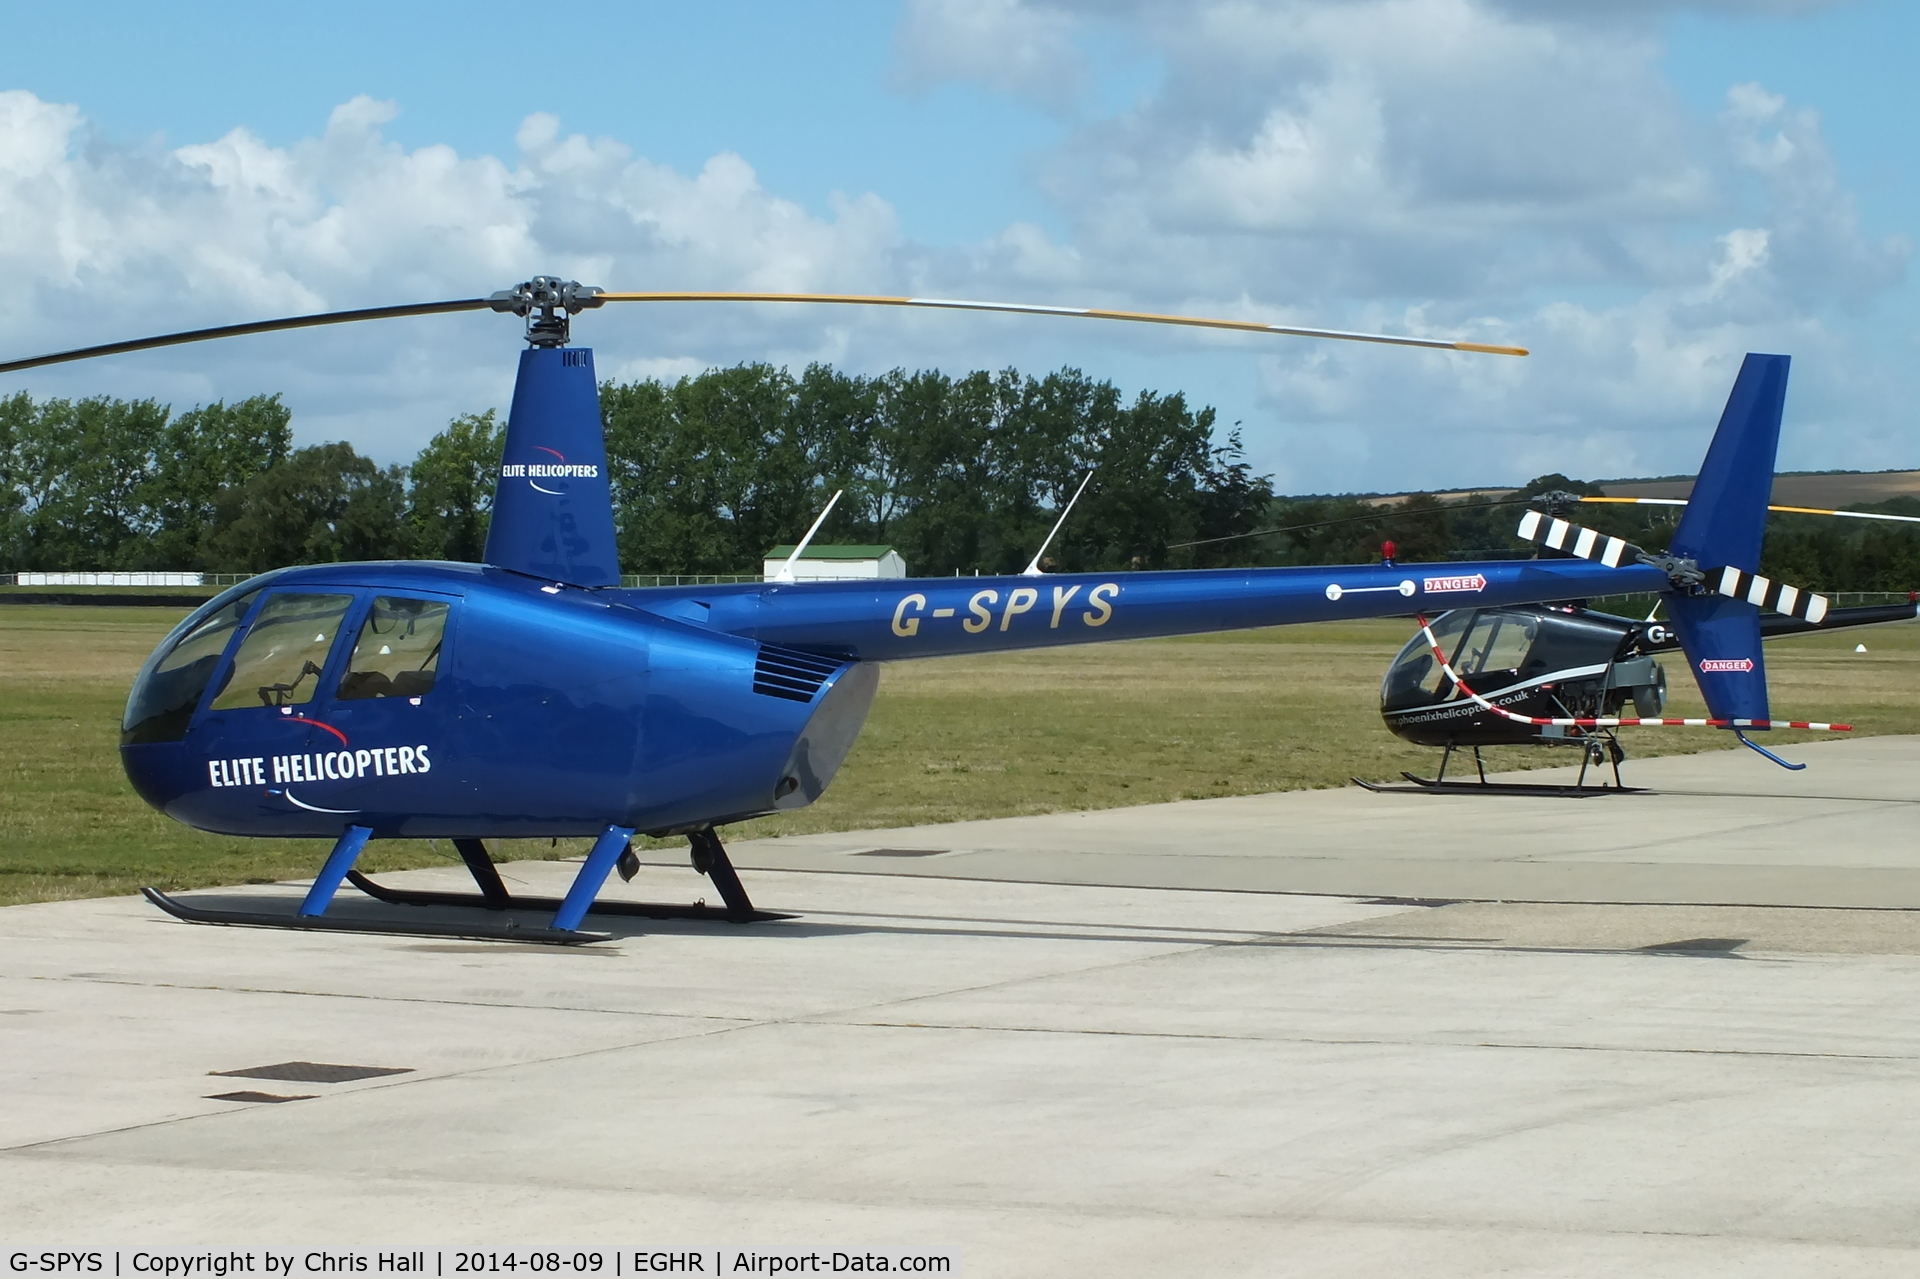 G-SPYS, 2006 Robinson R44 Raven II C/N 11274, at Goodwood airfield